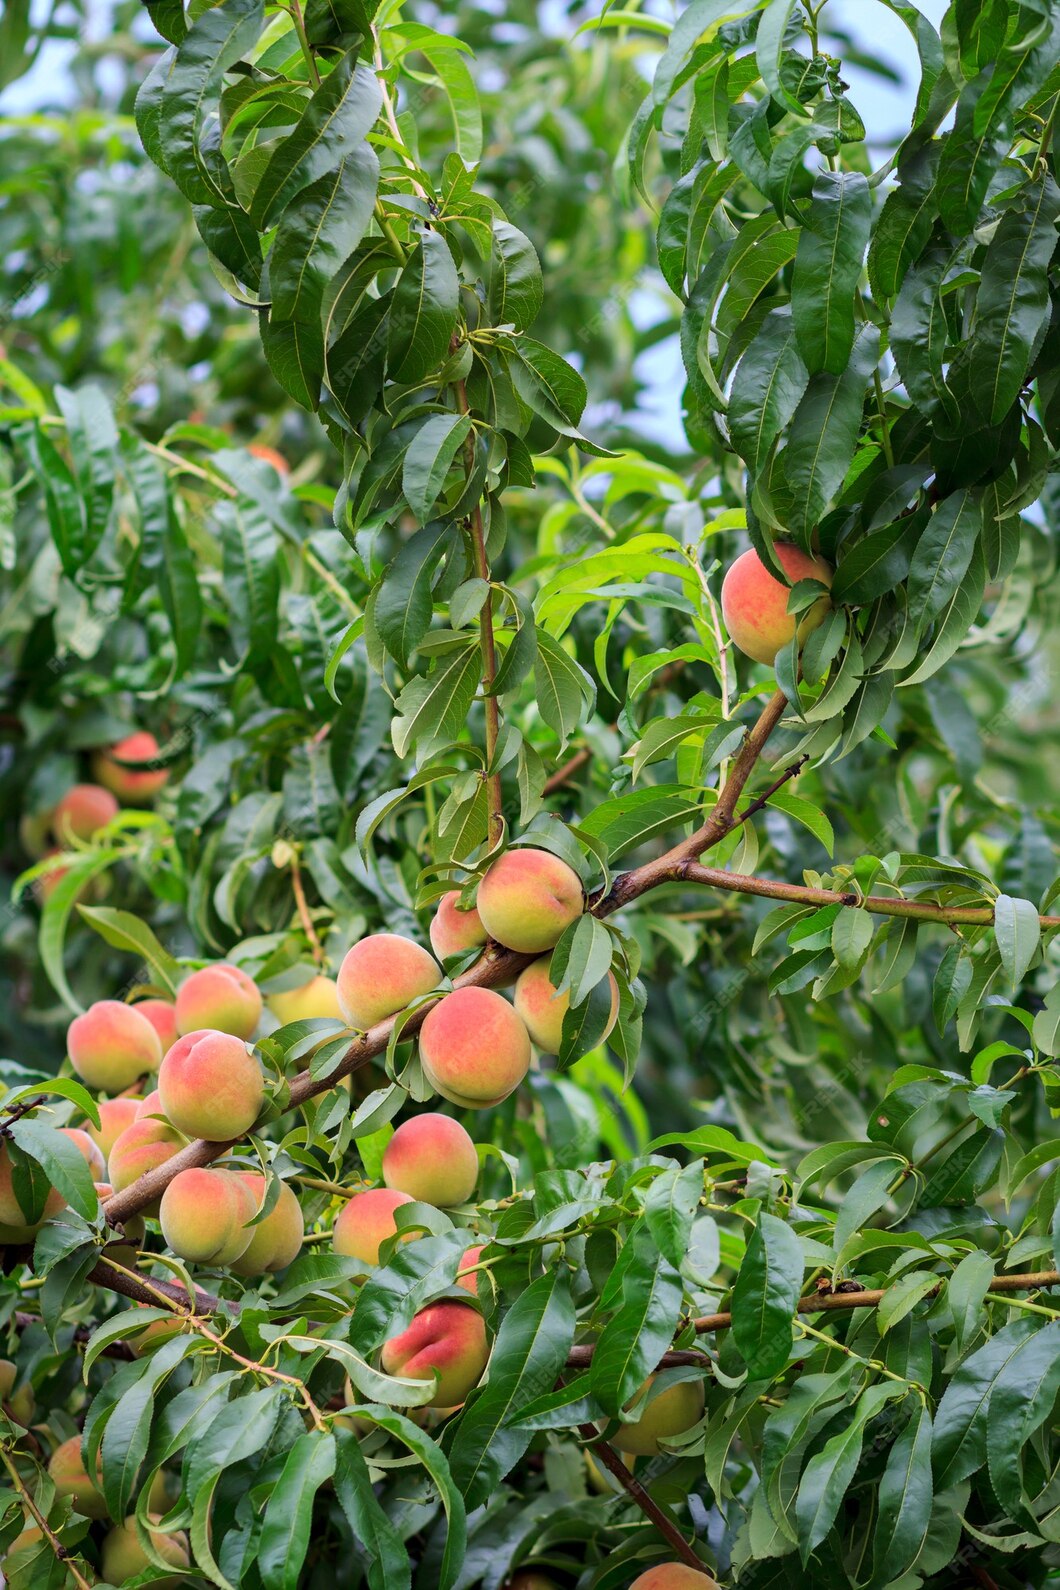 mellow-peaches-hanging-tree-orchard_393202-5323.jpg